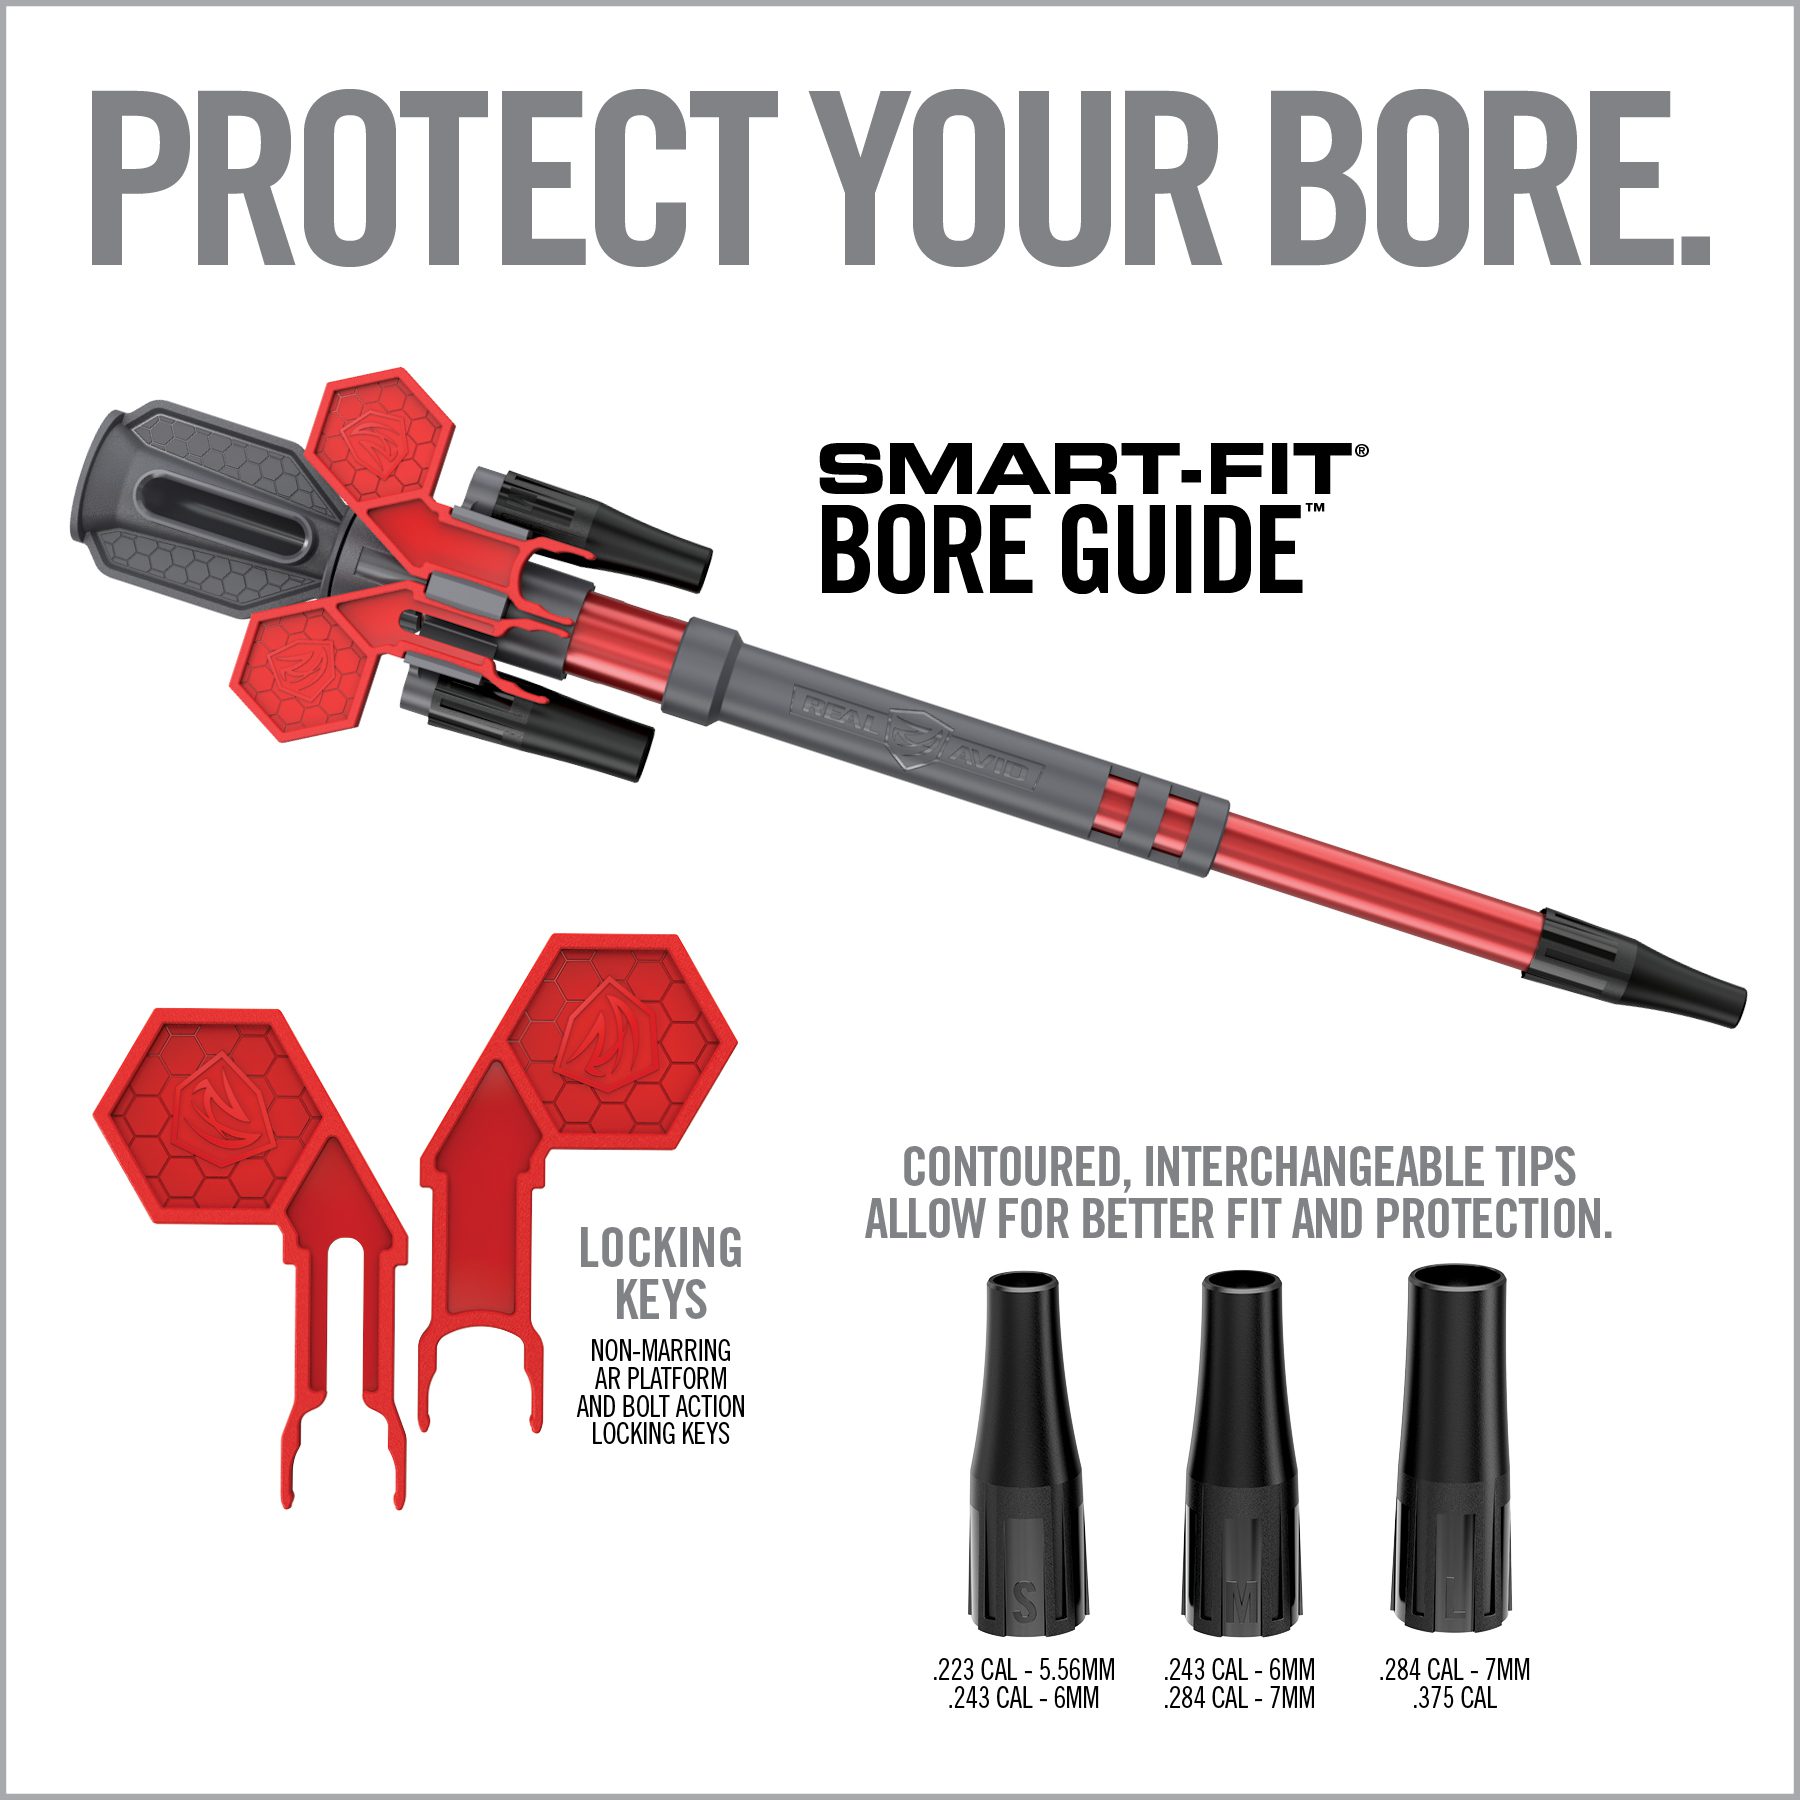 the instructions for how to protect your bore